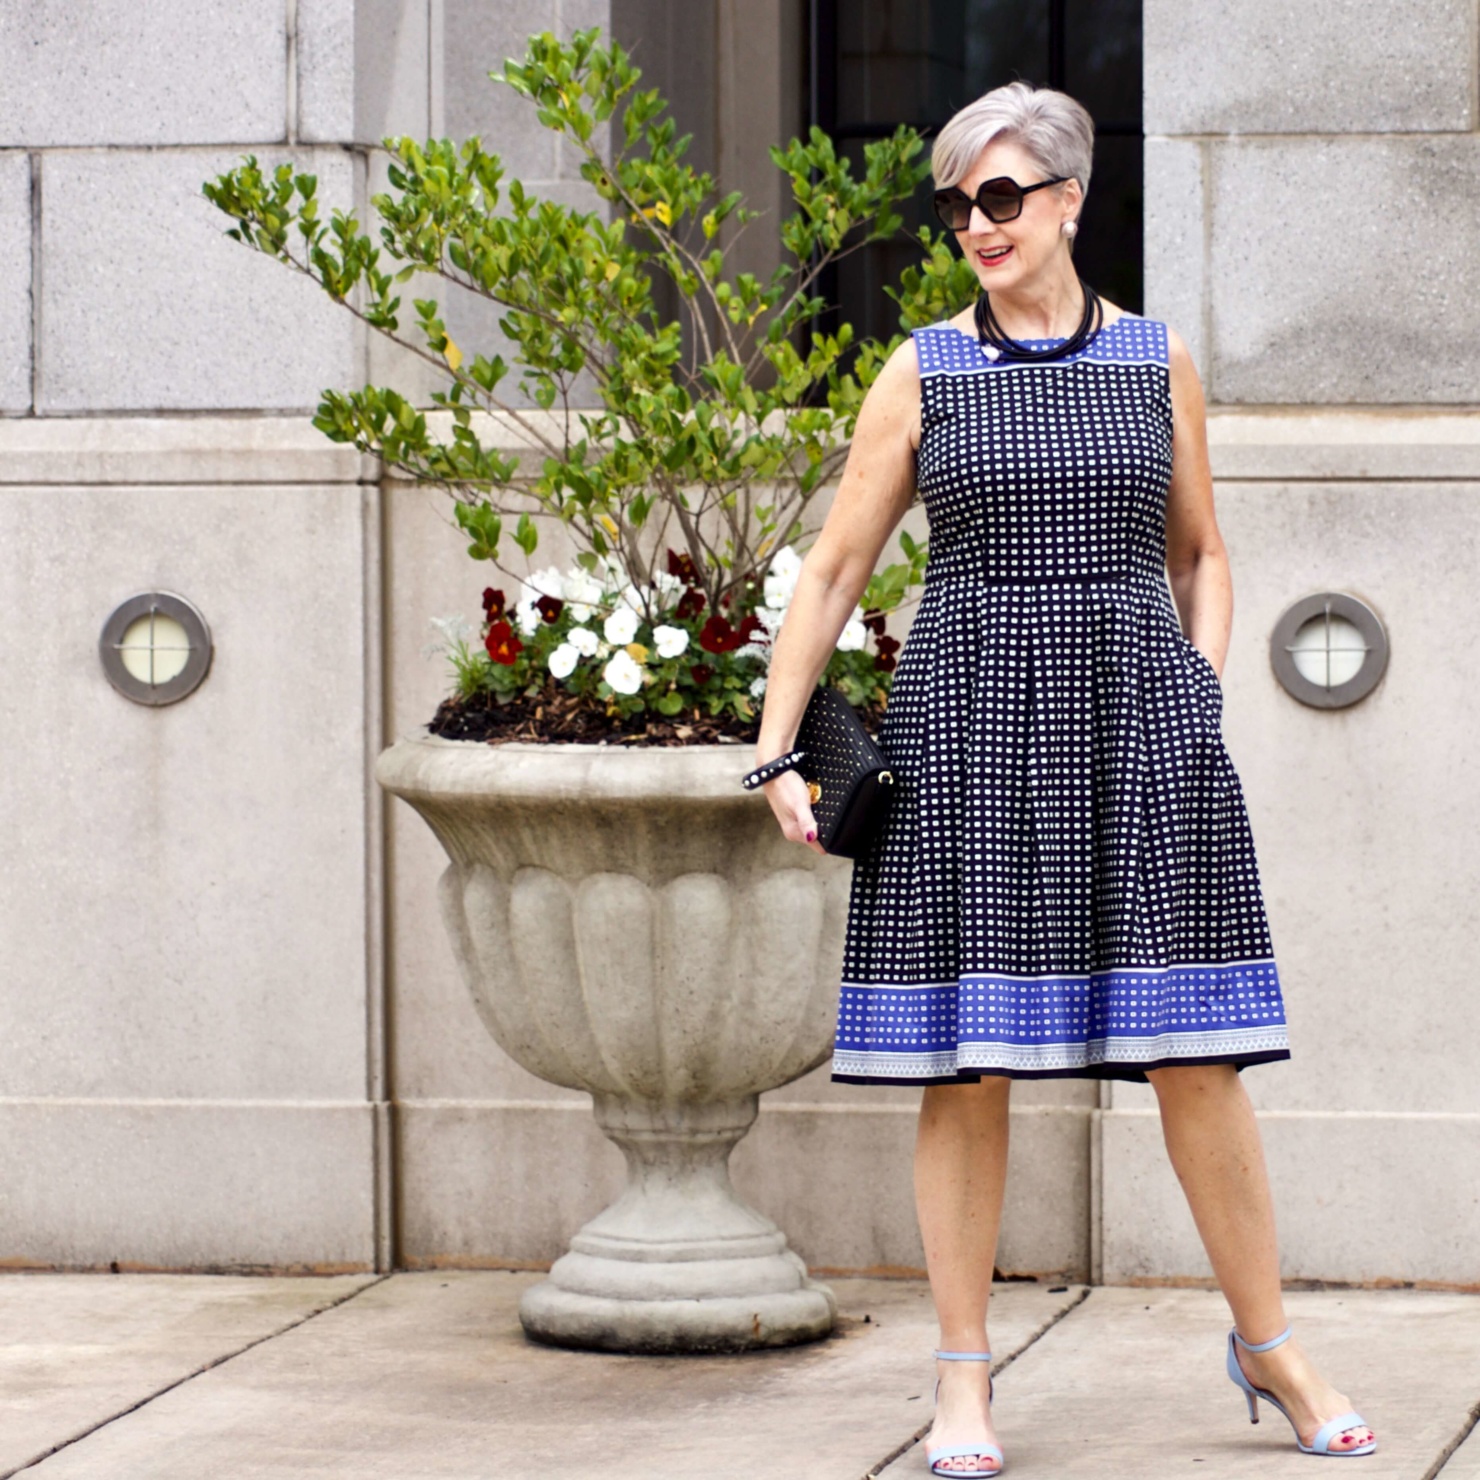 beth from Style at a Certain Age wears a fit and flare dress, kitten heel sandals, and a black clutch handbag